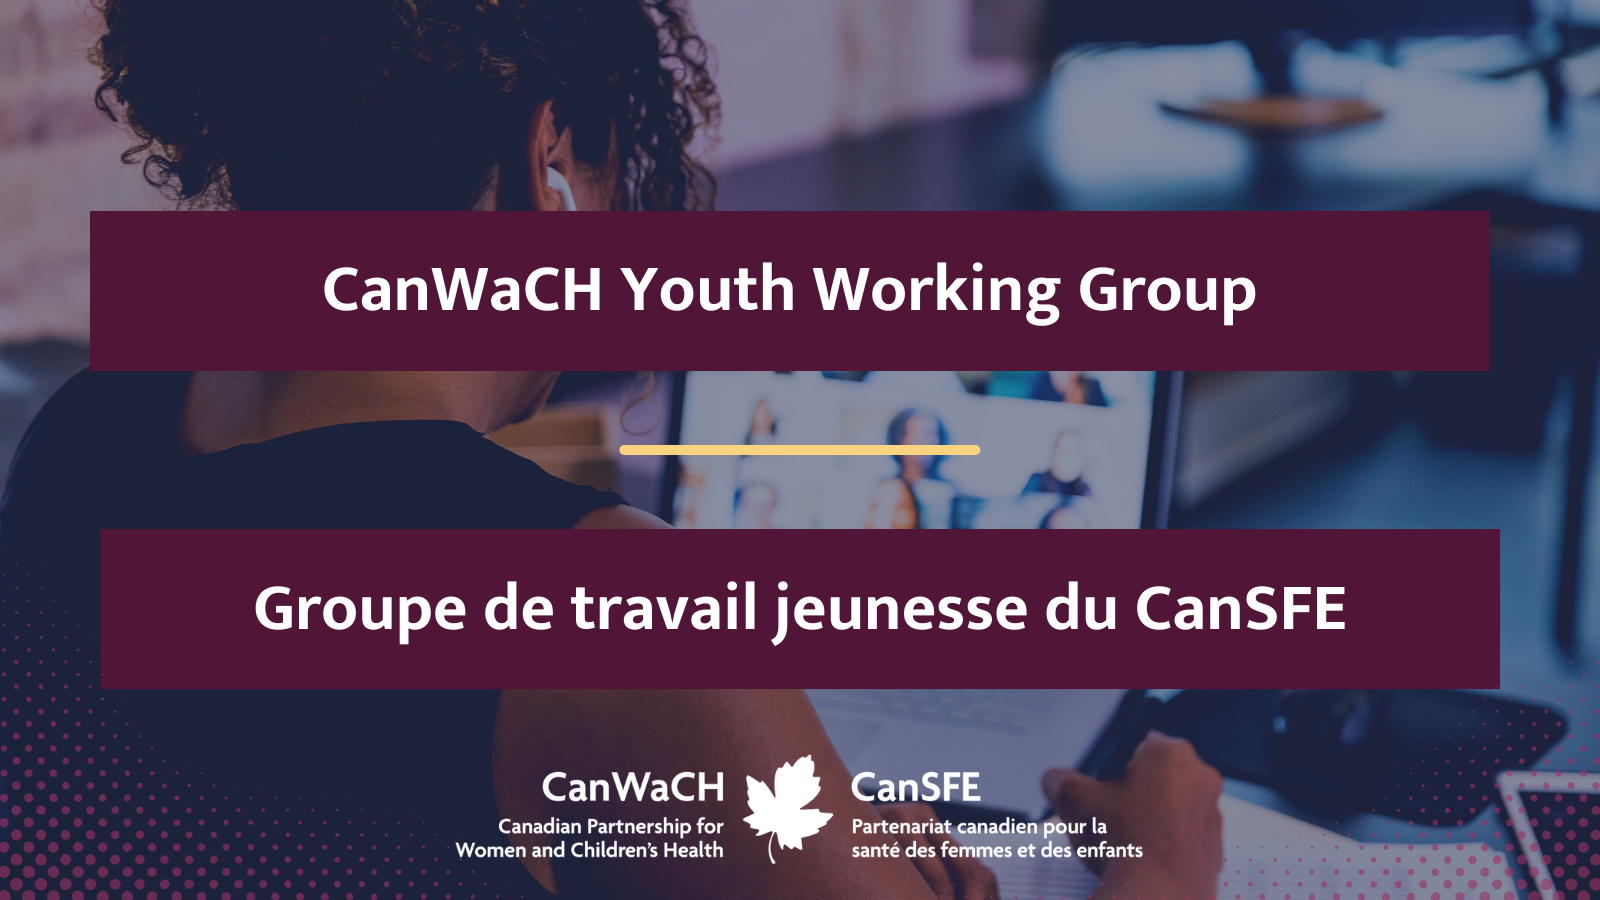 Calling all youth! Submit your application for CanWaCH’s Youth Working Group